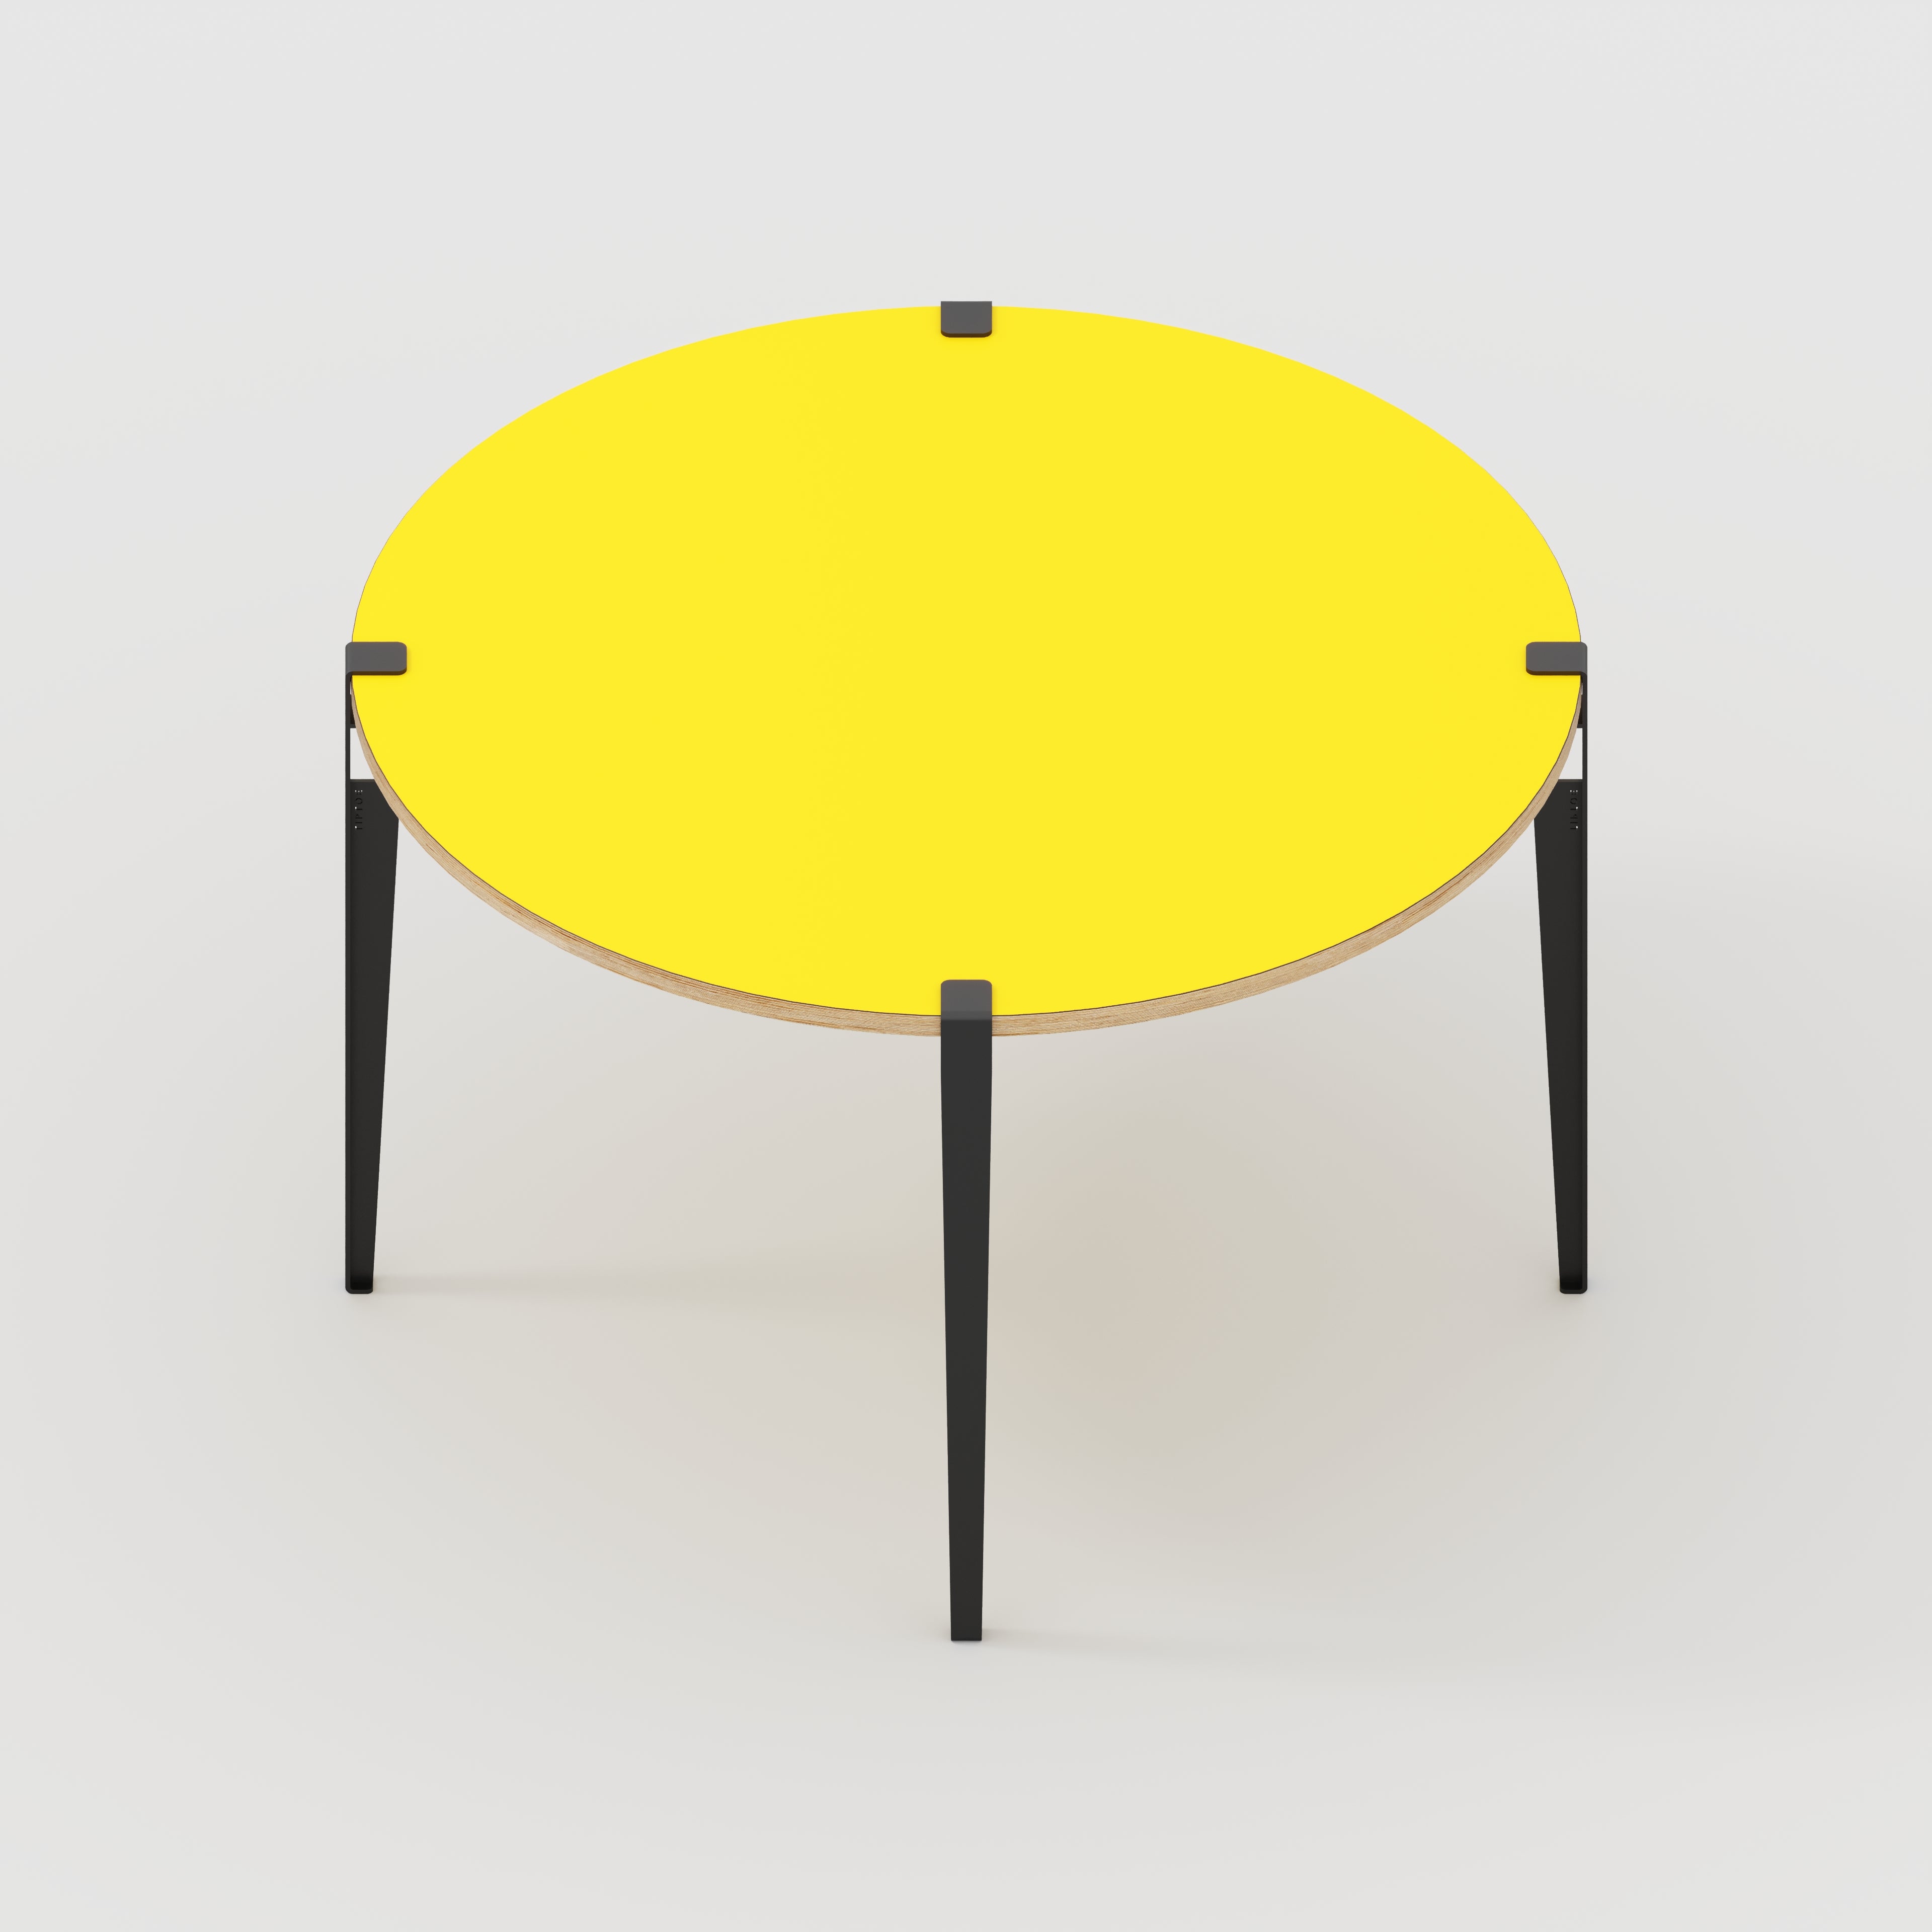 Round Table with Black Tiptoe Legs - Formica Chrome Yellow - 1200(dia) x 750(h)